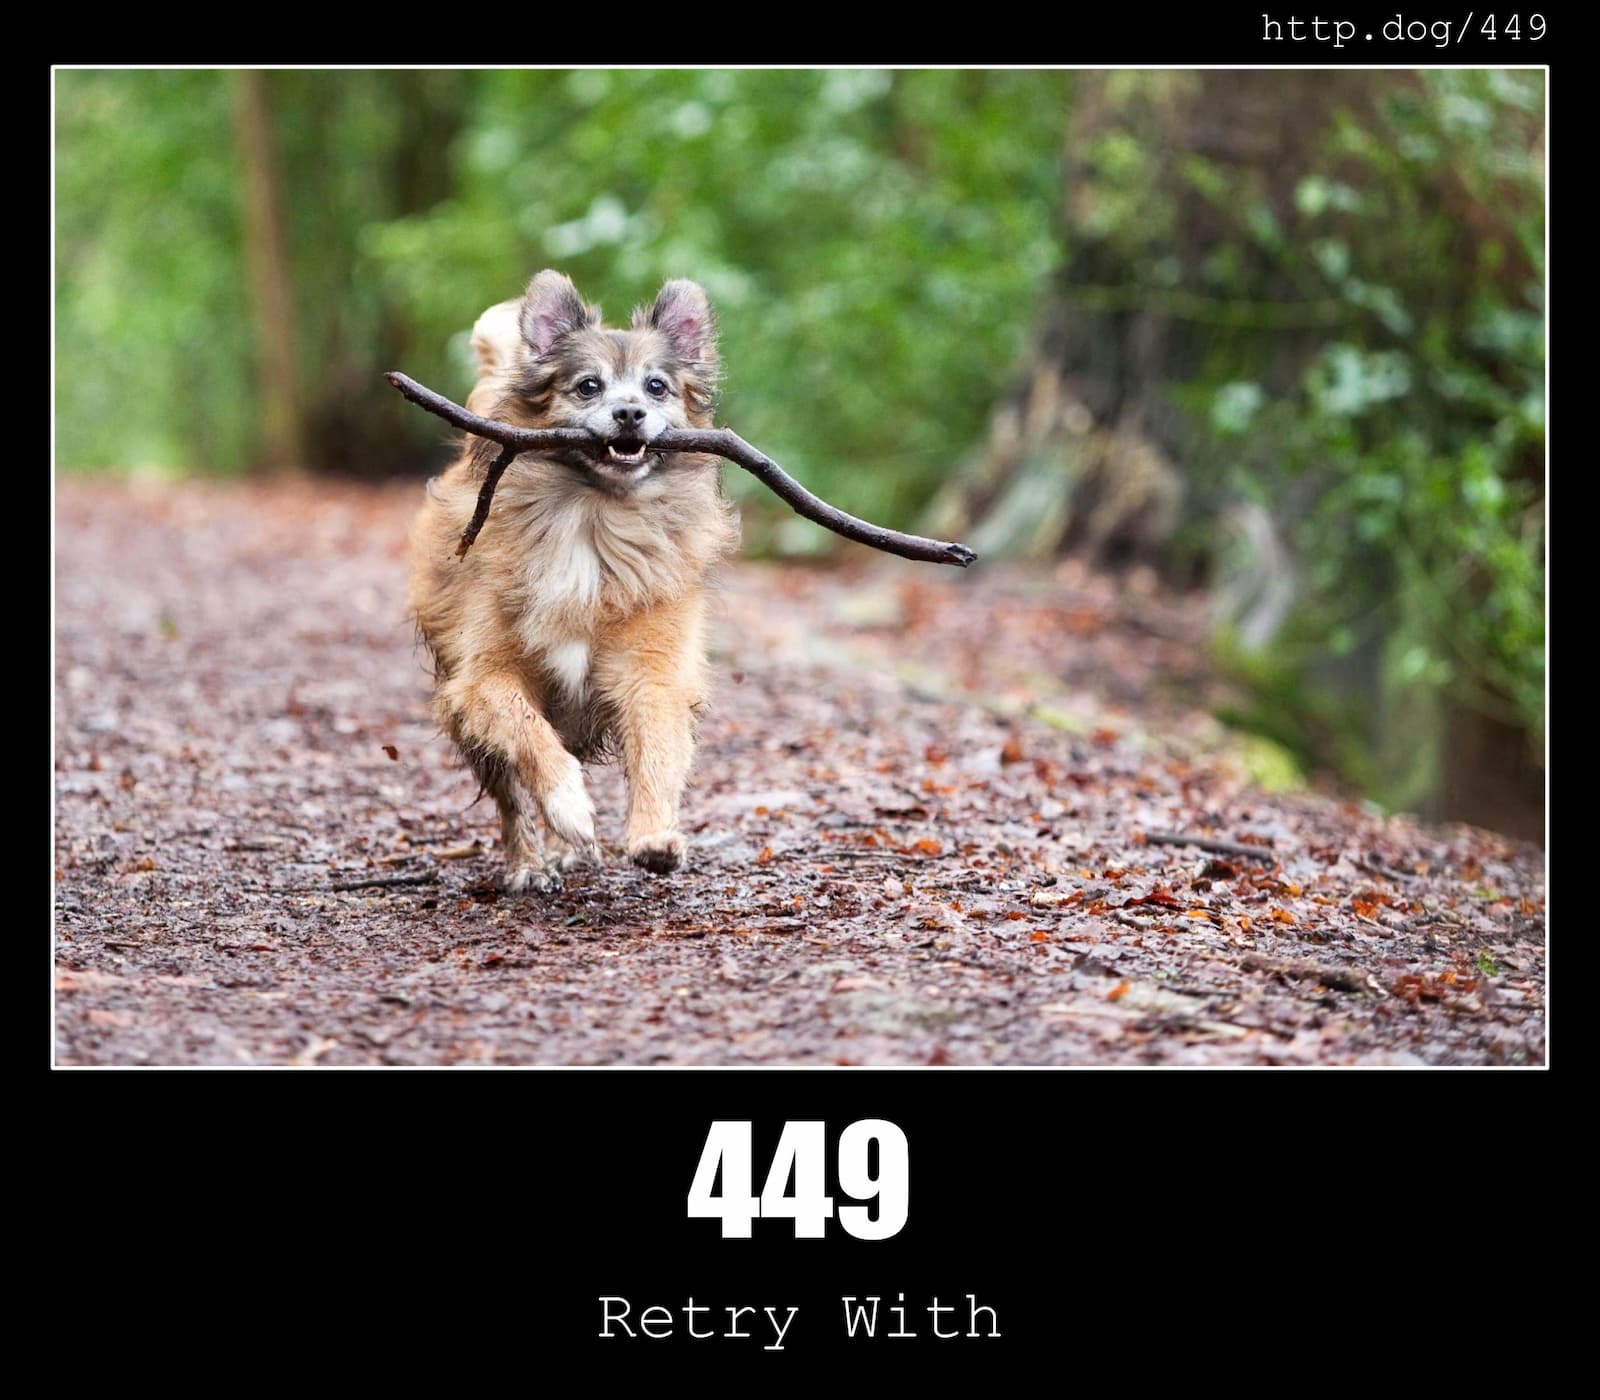 HTTP Status Code 449 Retry With & Dogs